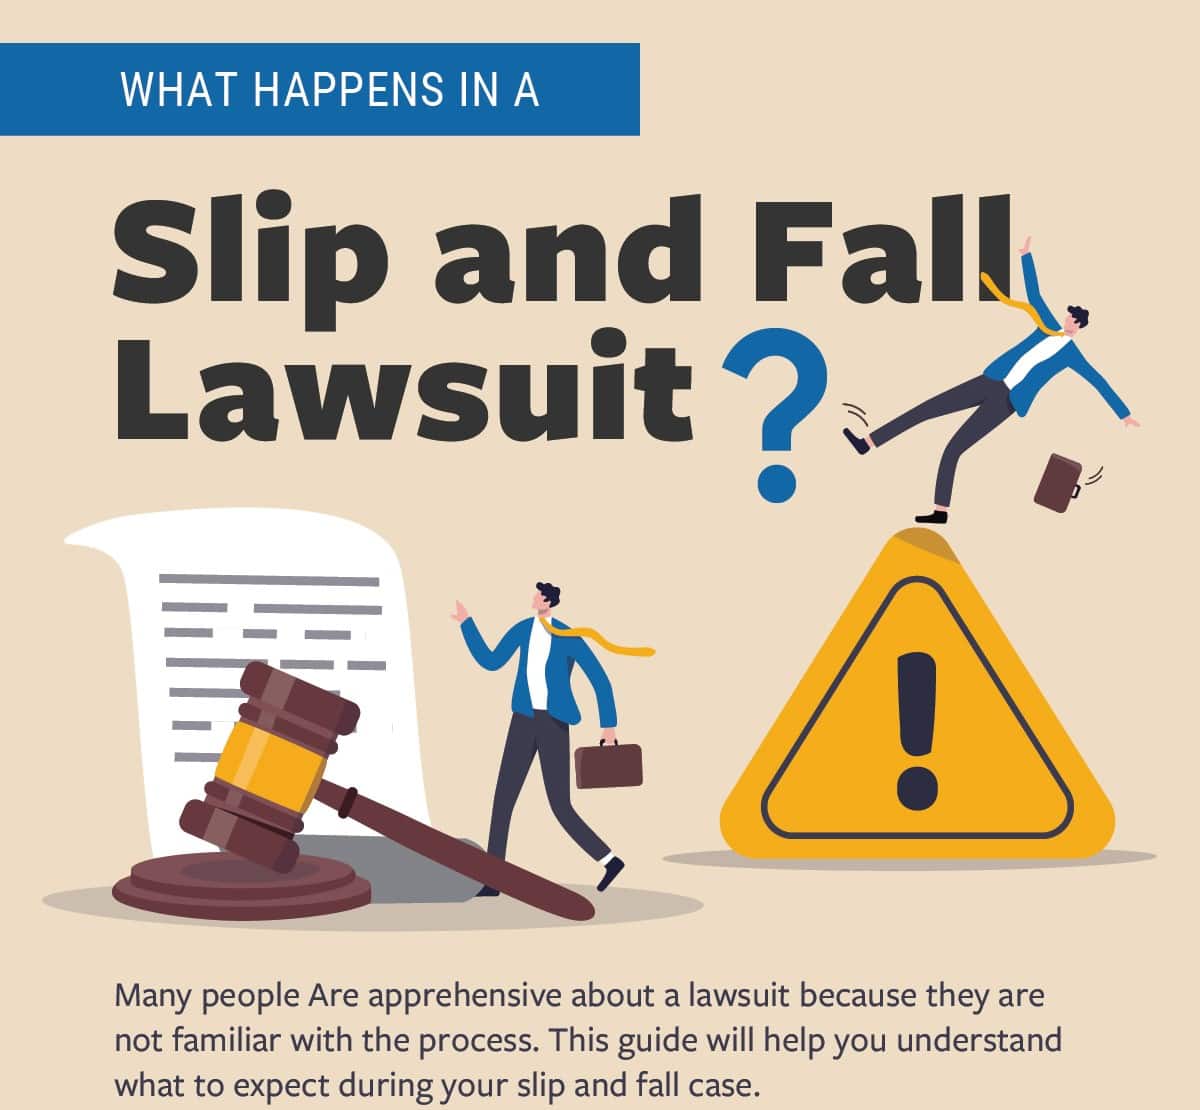 What Happens in a Slip and Fall Lawsuit